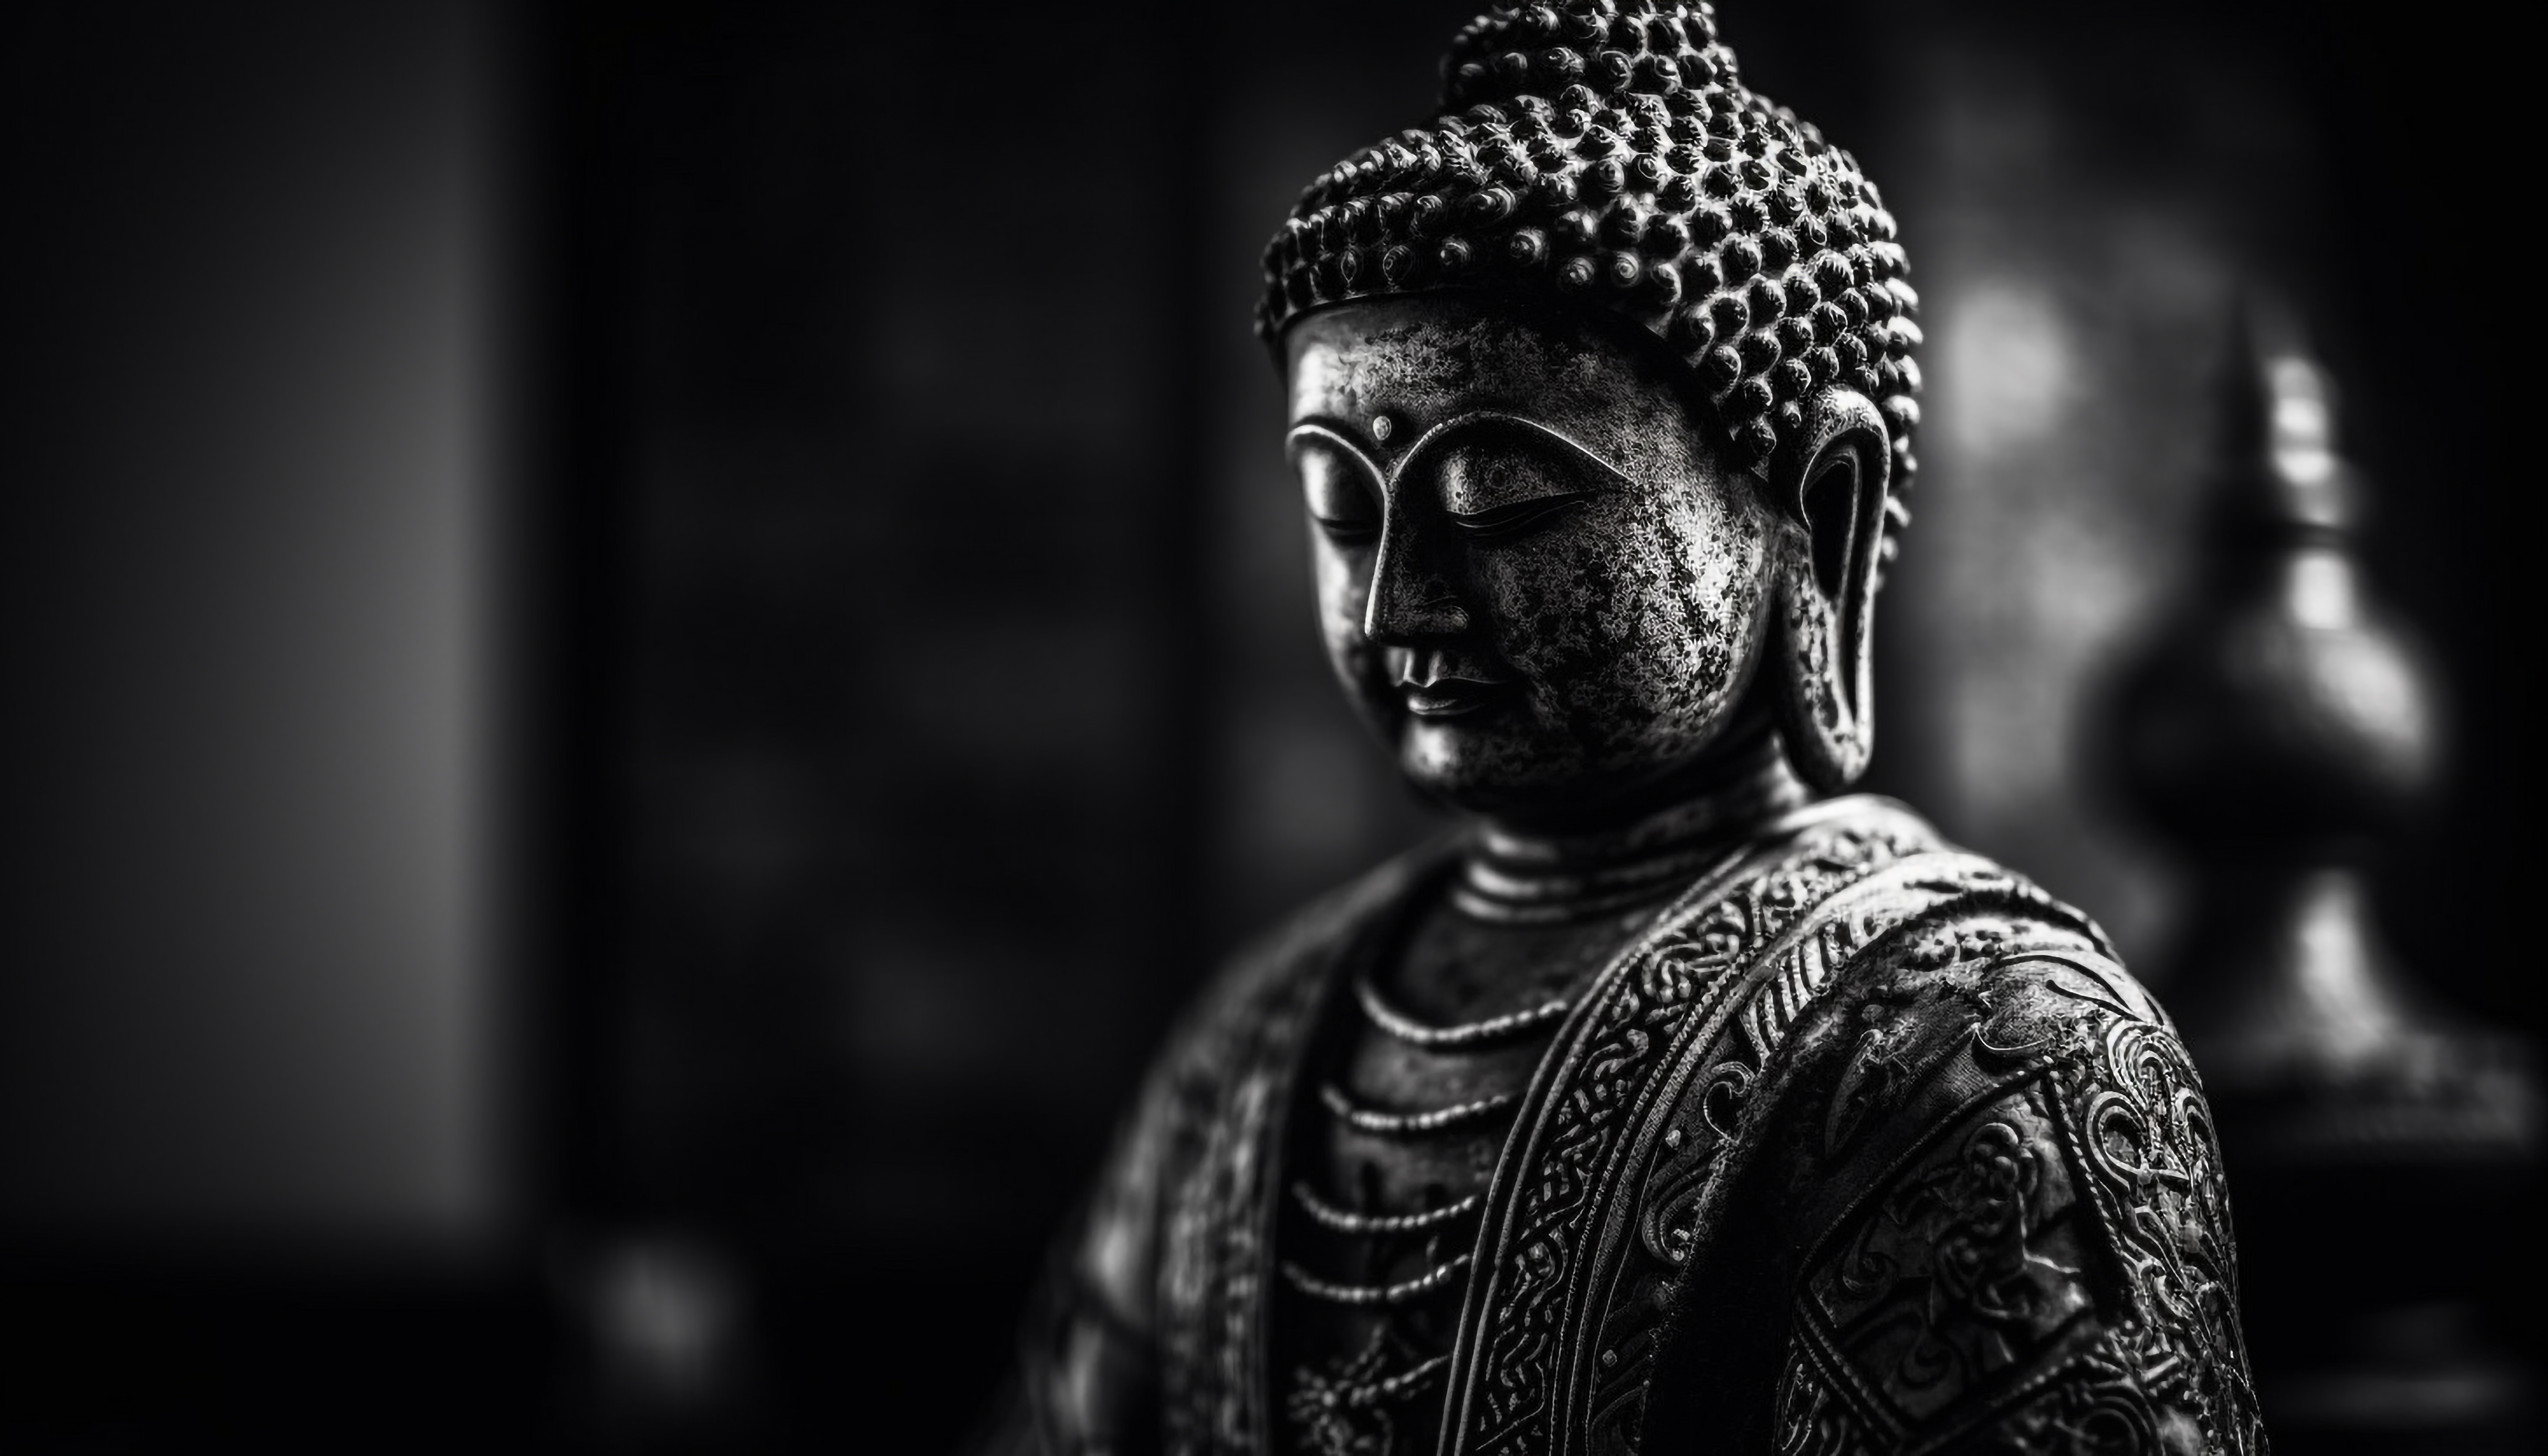 750+ Buddhism Pictures [HD] | Download Free Images on Unsplash